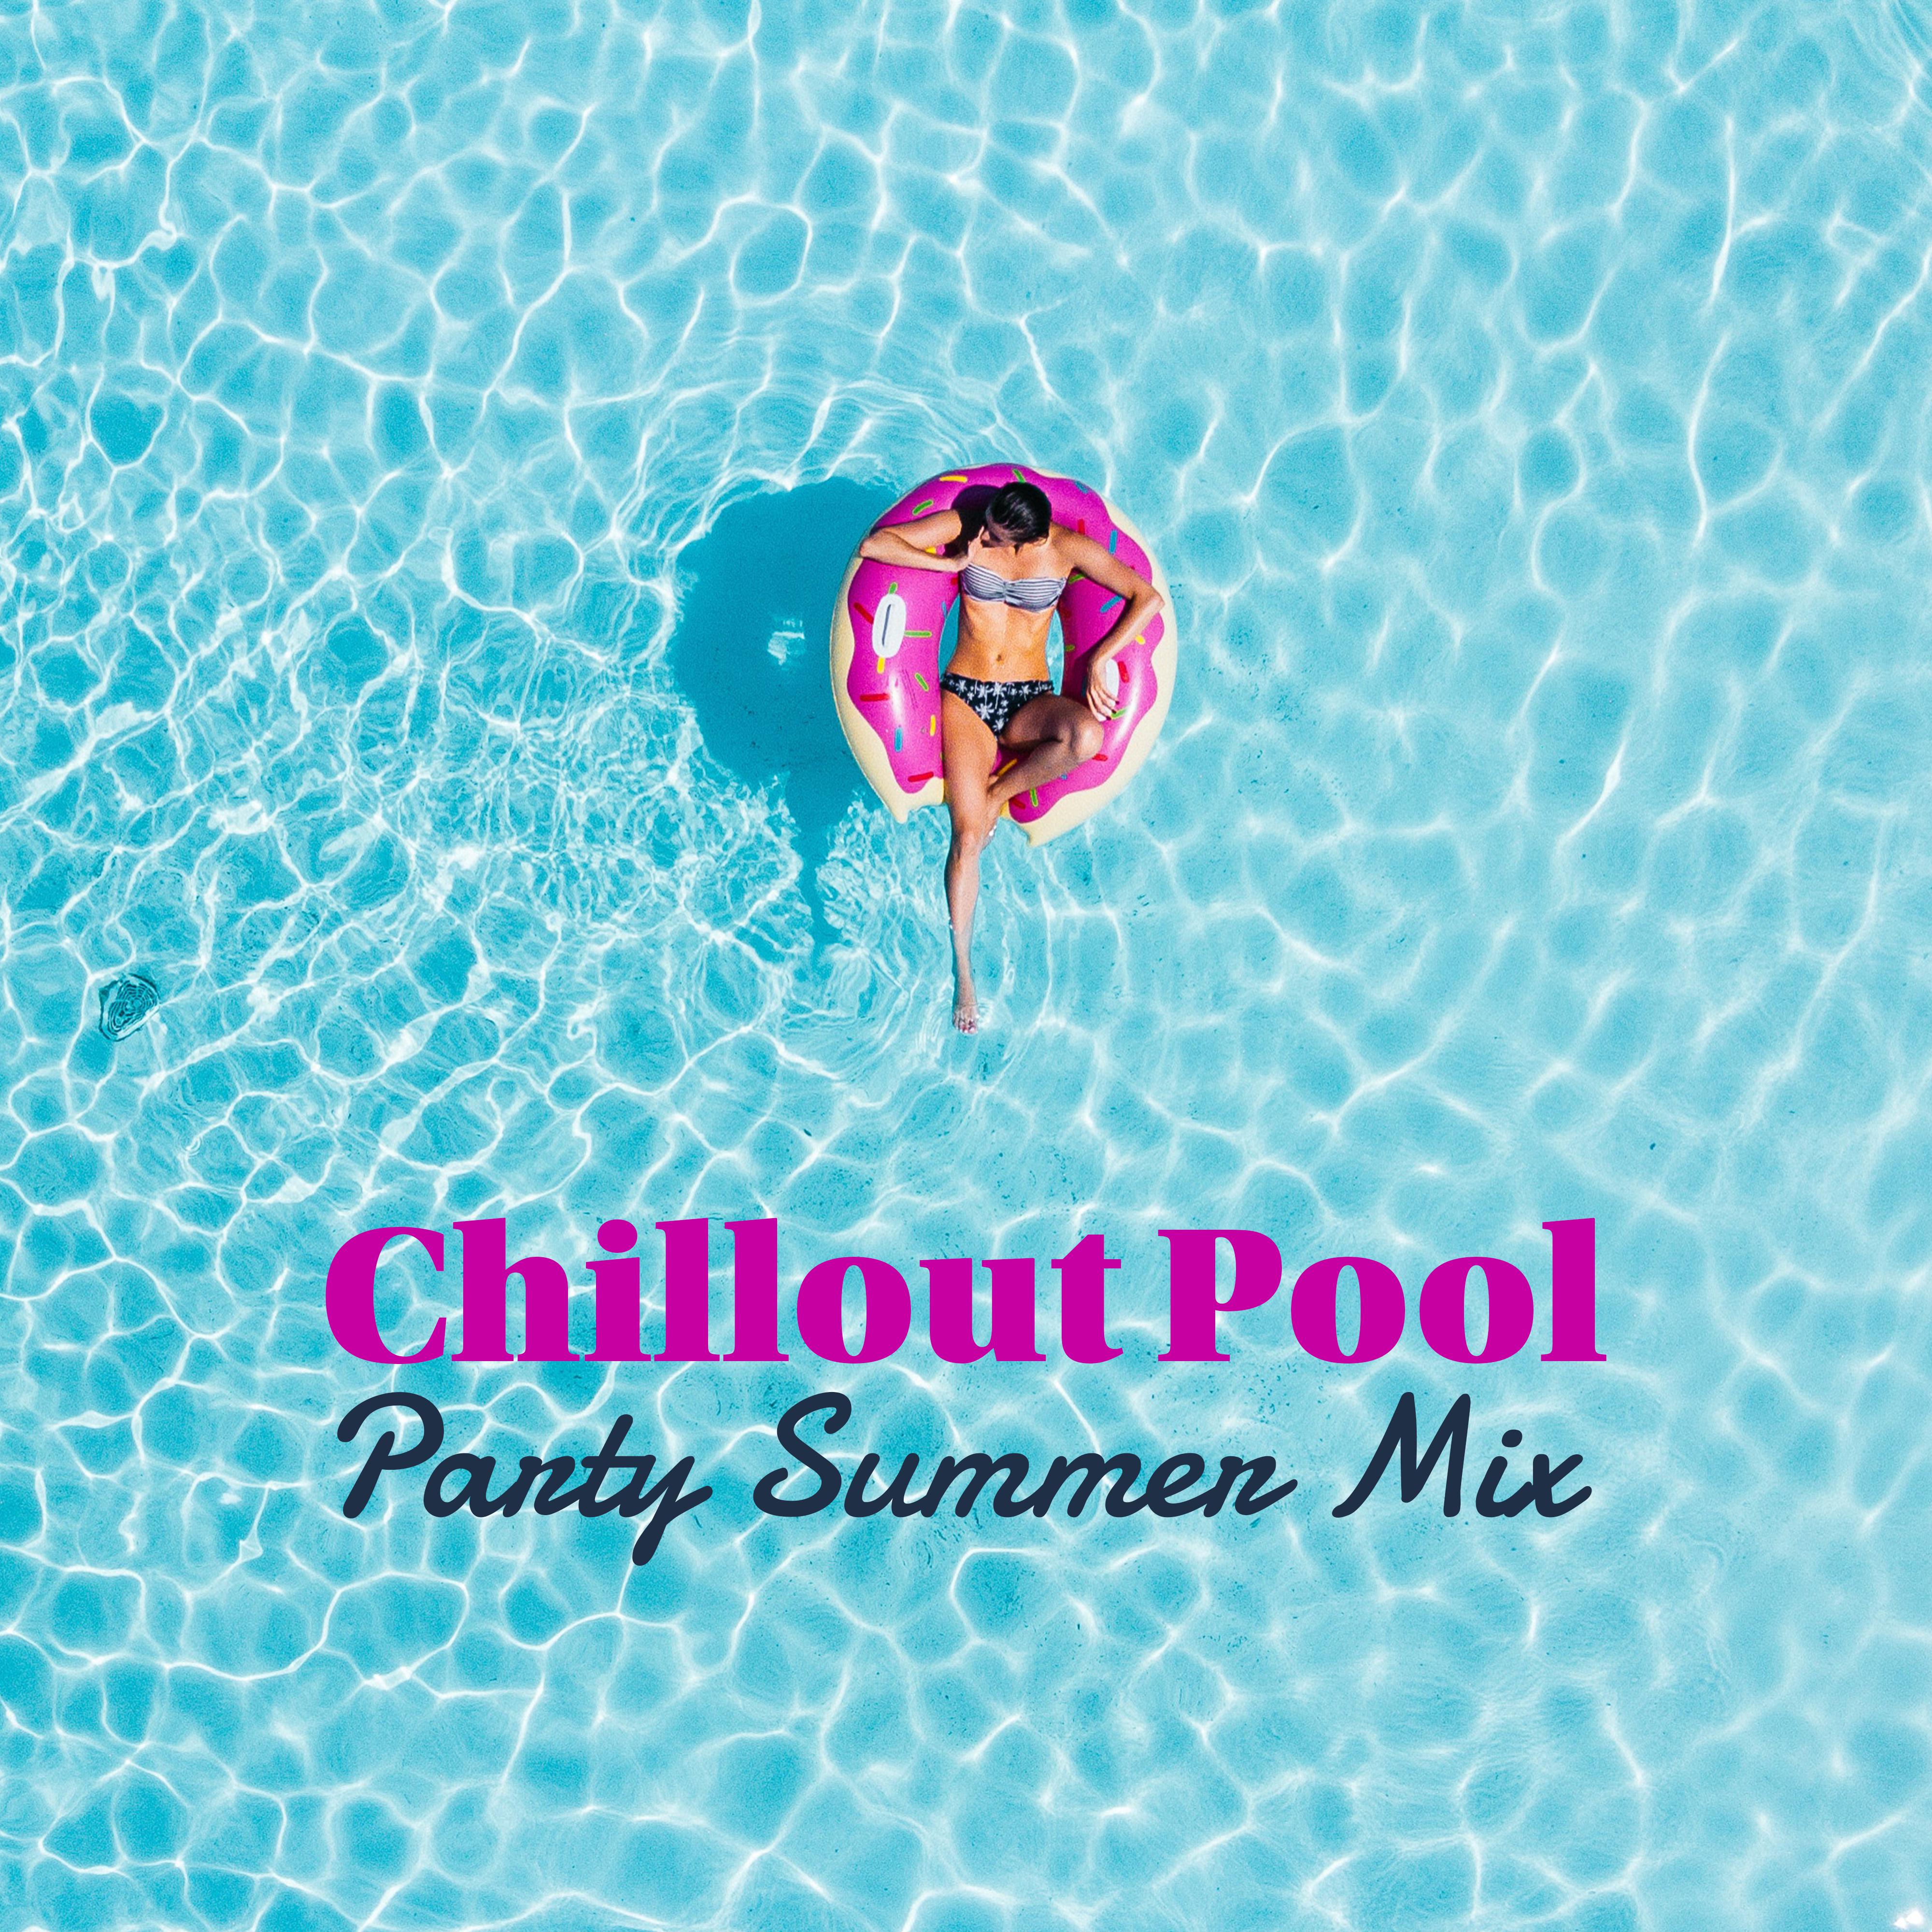 Chillout Pool Party Summer Mix: 2019 Cool Electronic Vibes, Chill Out Dance Music Compilation, Beach Bar Cocktail Melodies